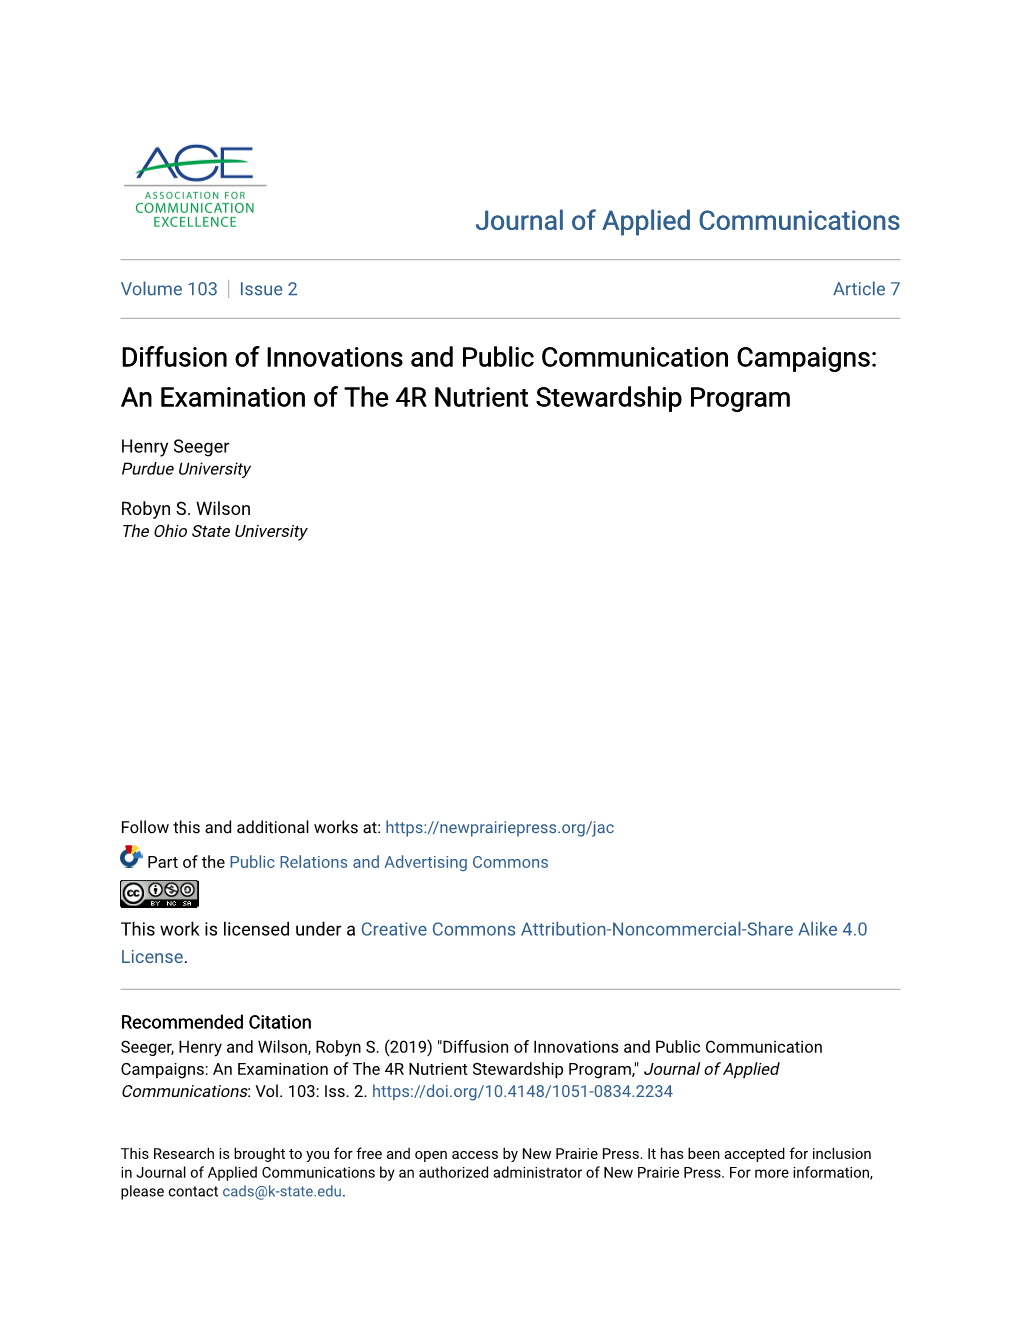 Diffusion of Innovations and Public Communication Campaigns: an Examination of the 4R Nutrient Stewardship Program